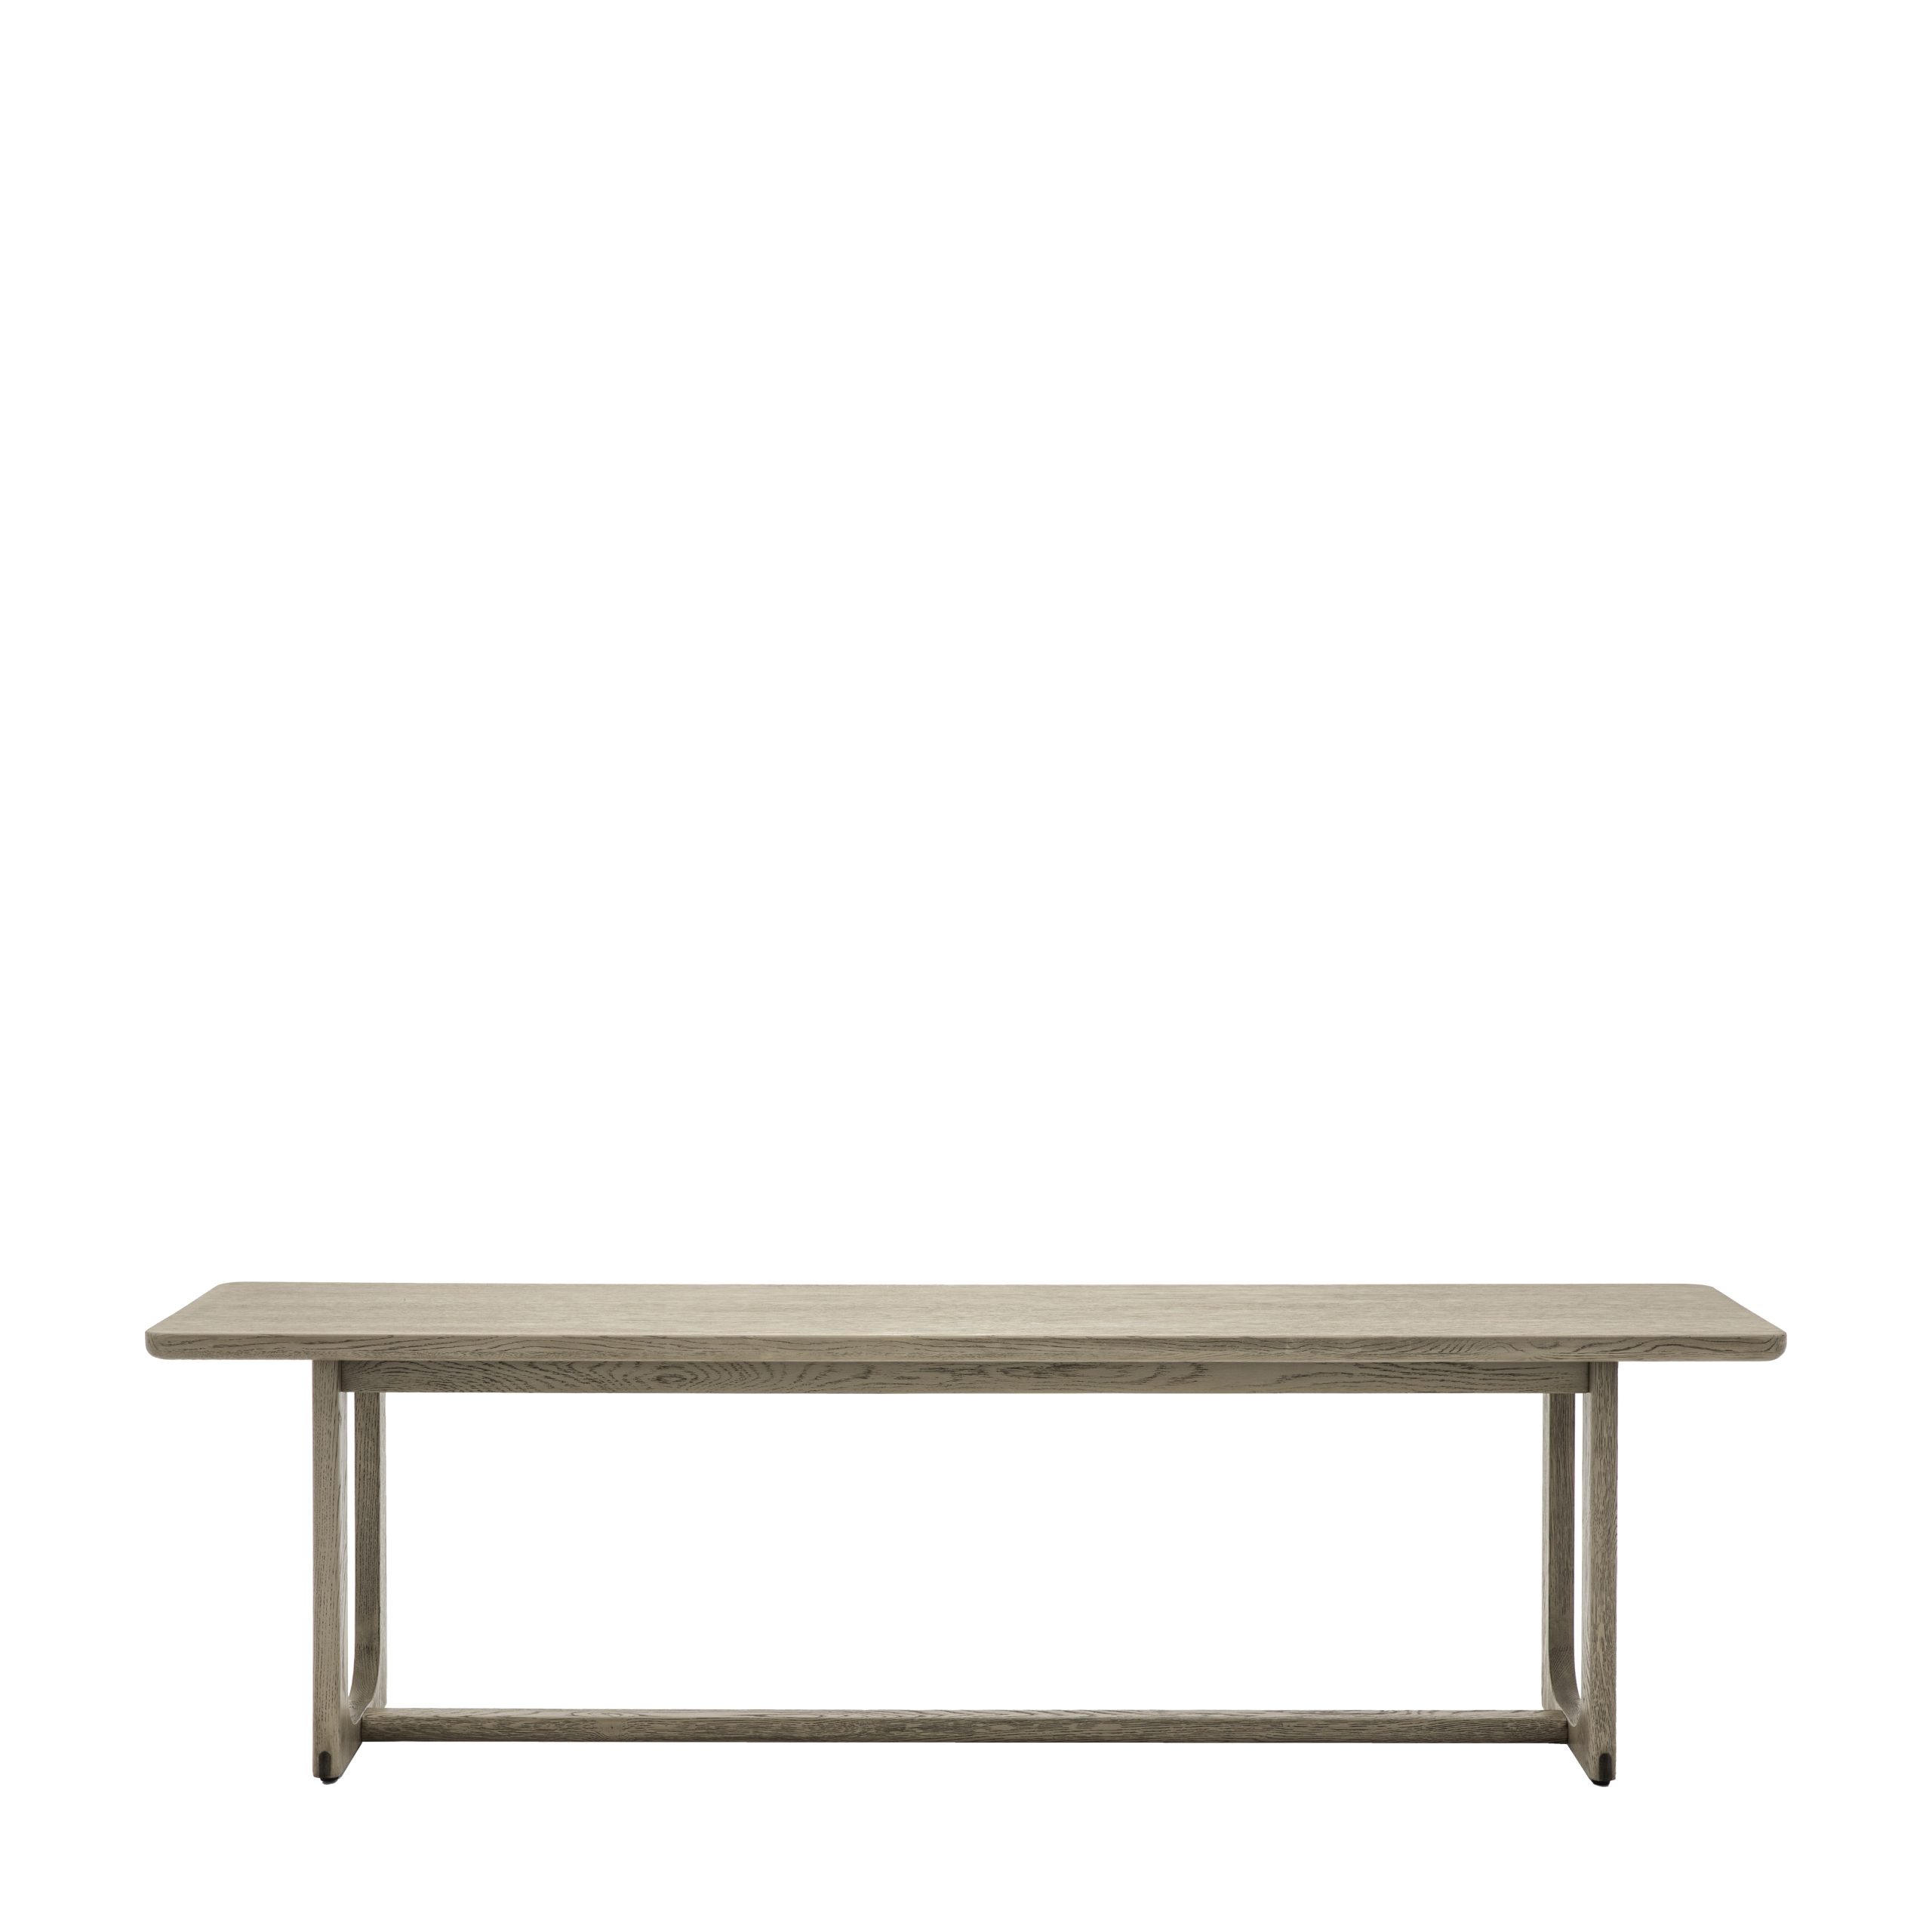 Gallery Direct Craft Dining Bench Smoked